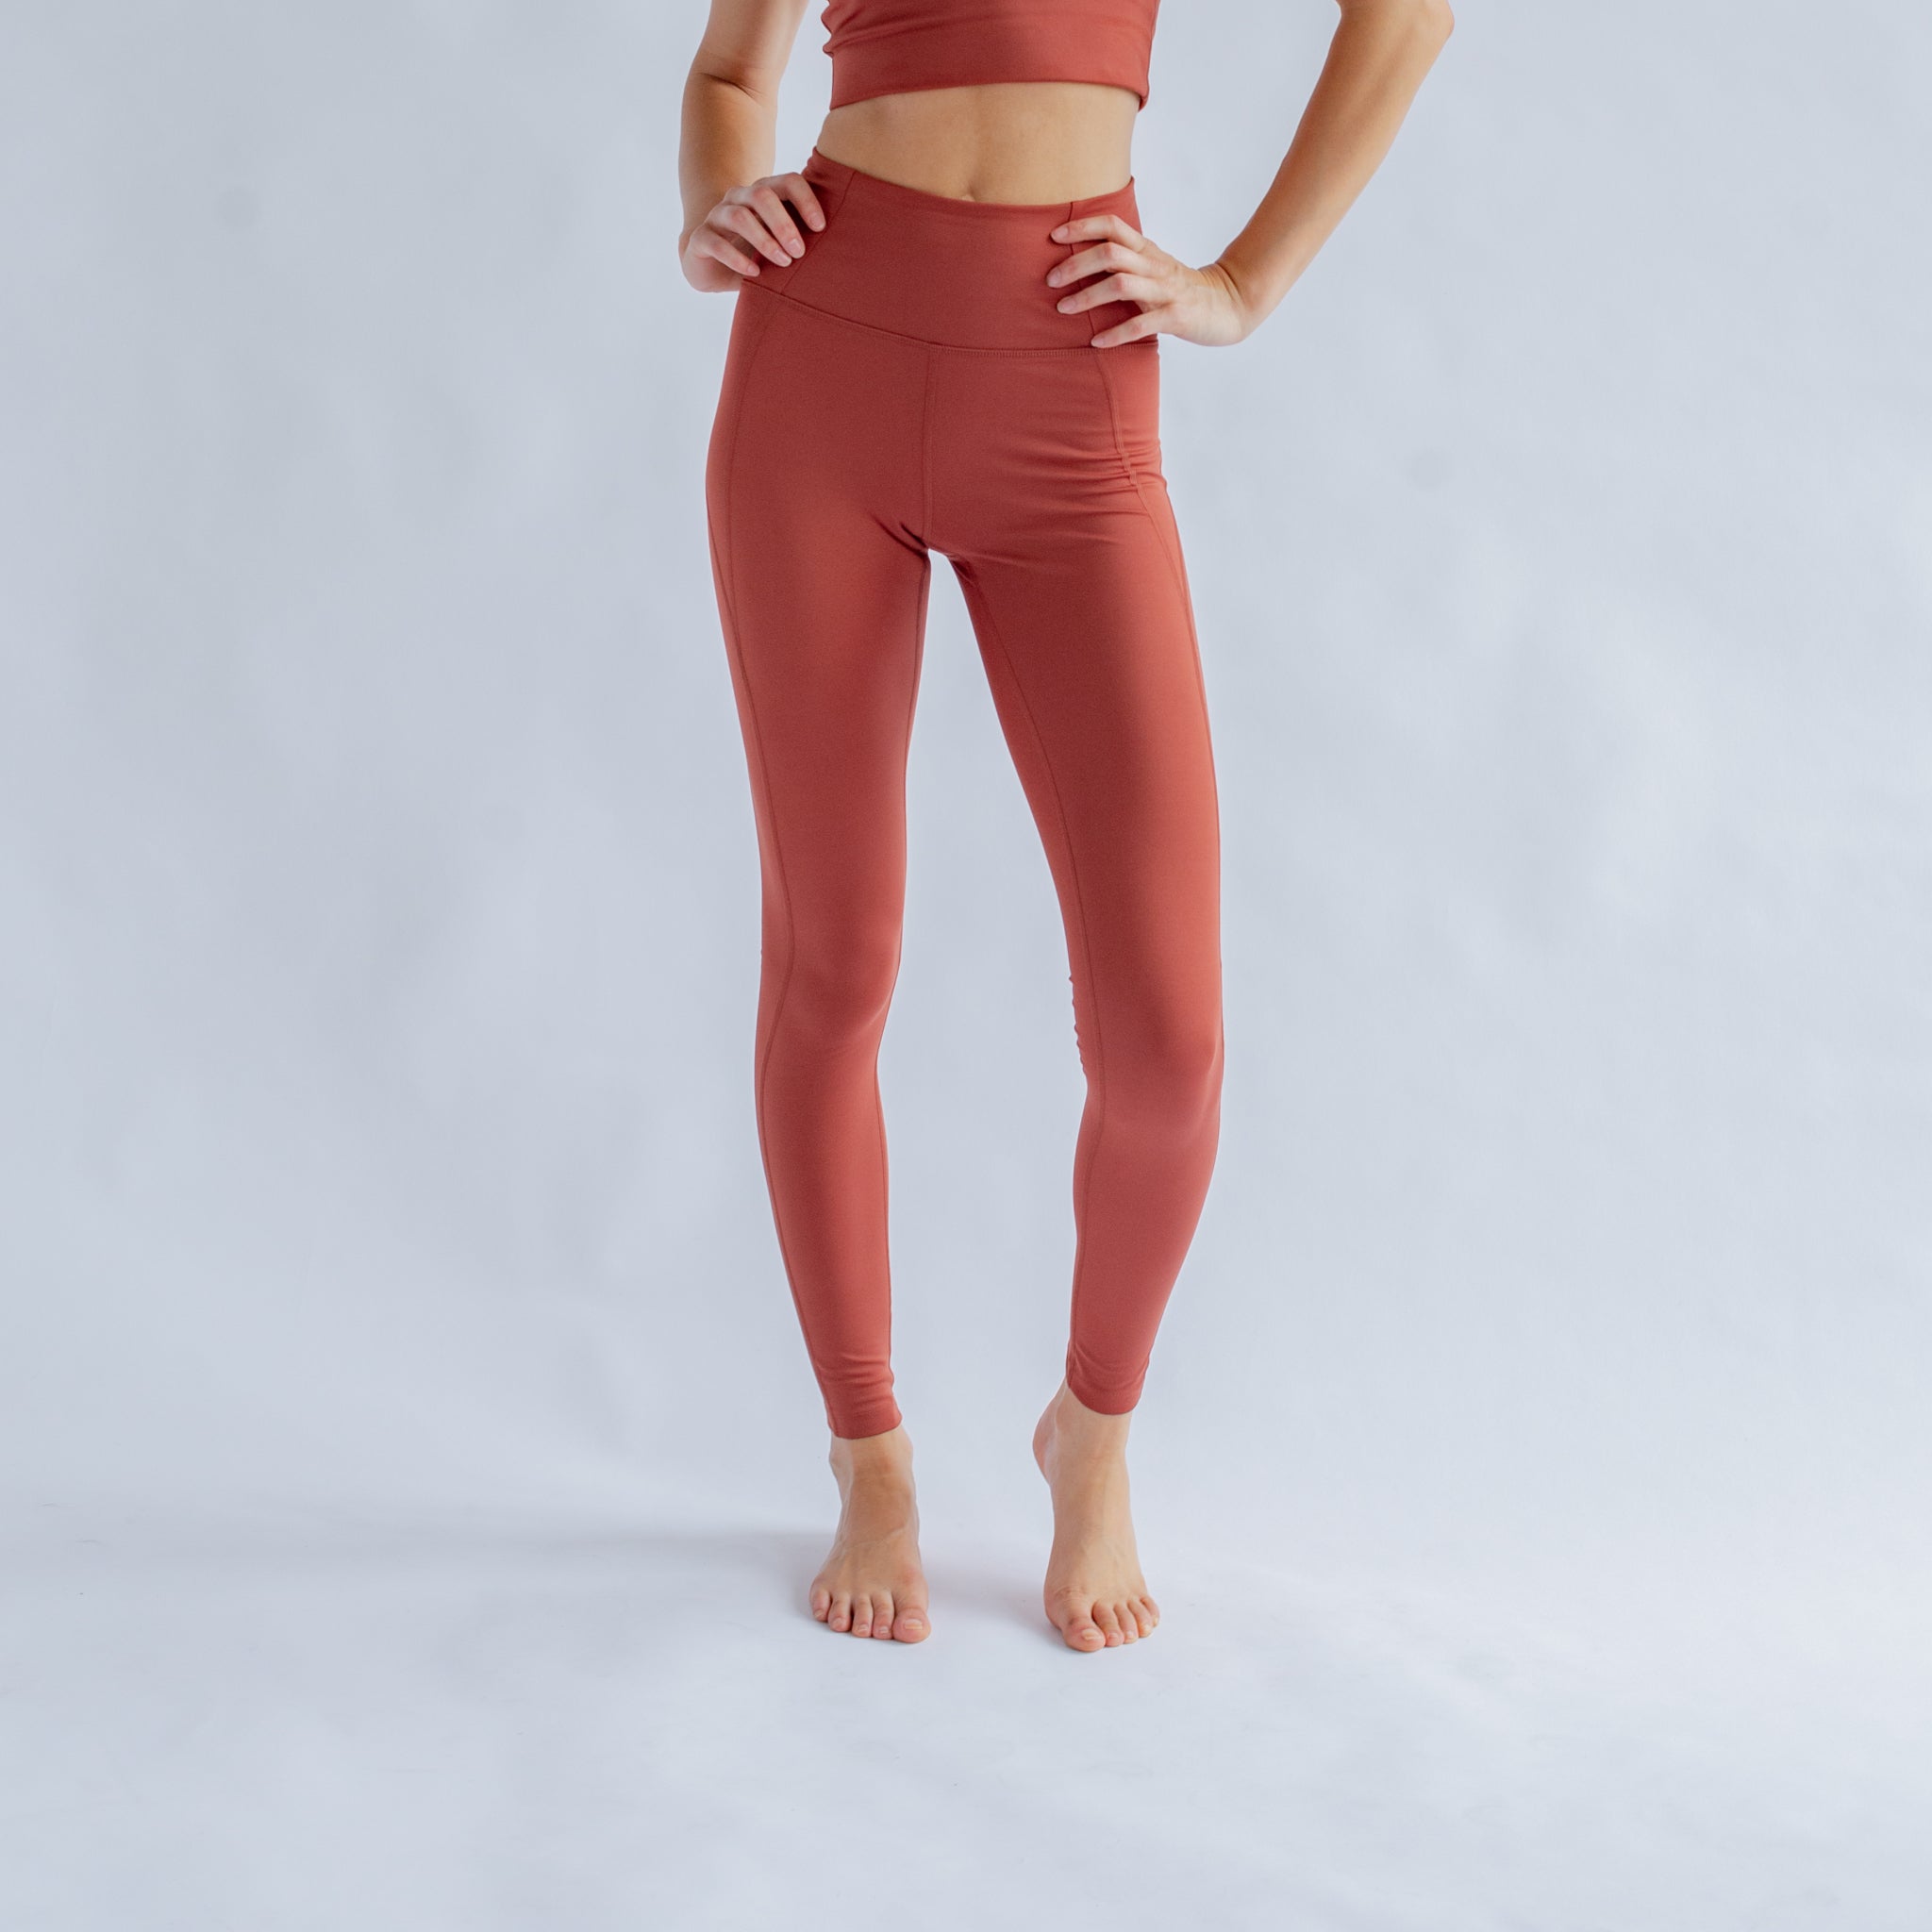 Girlfriend Collective Leggings "Compressive High-Rise" long